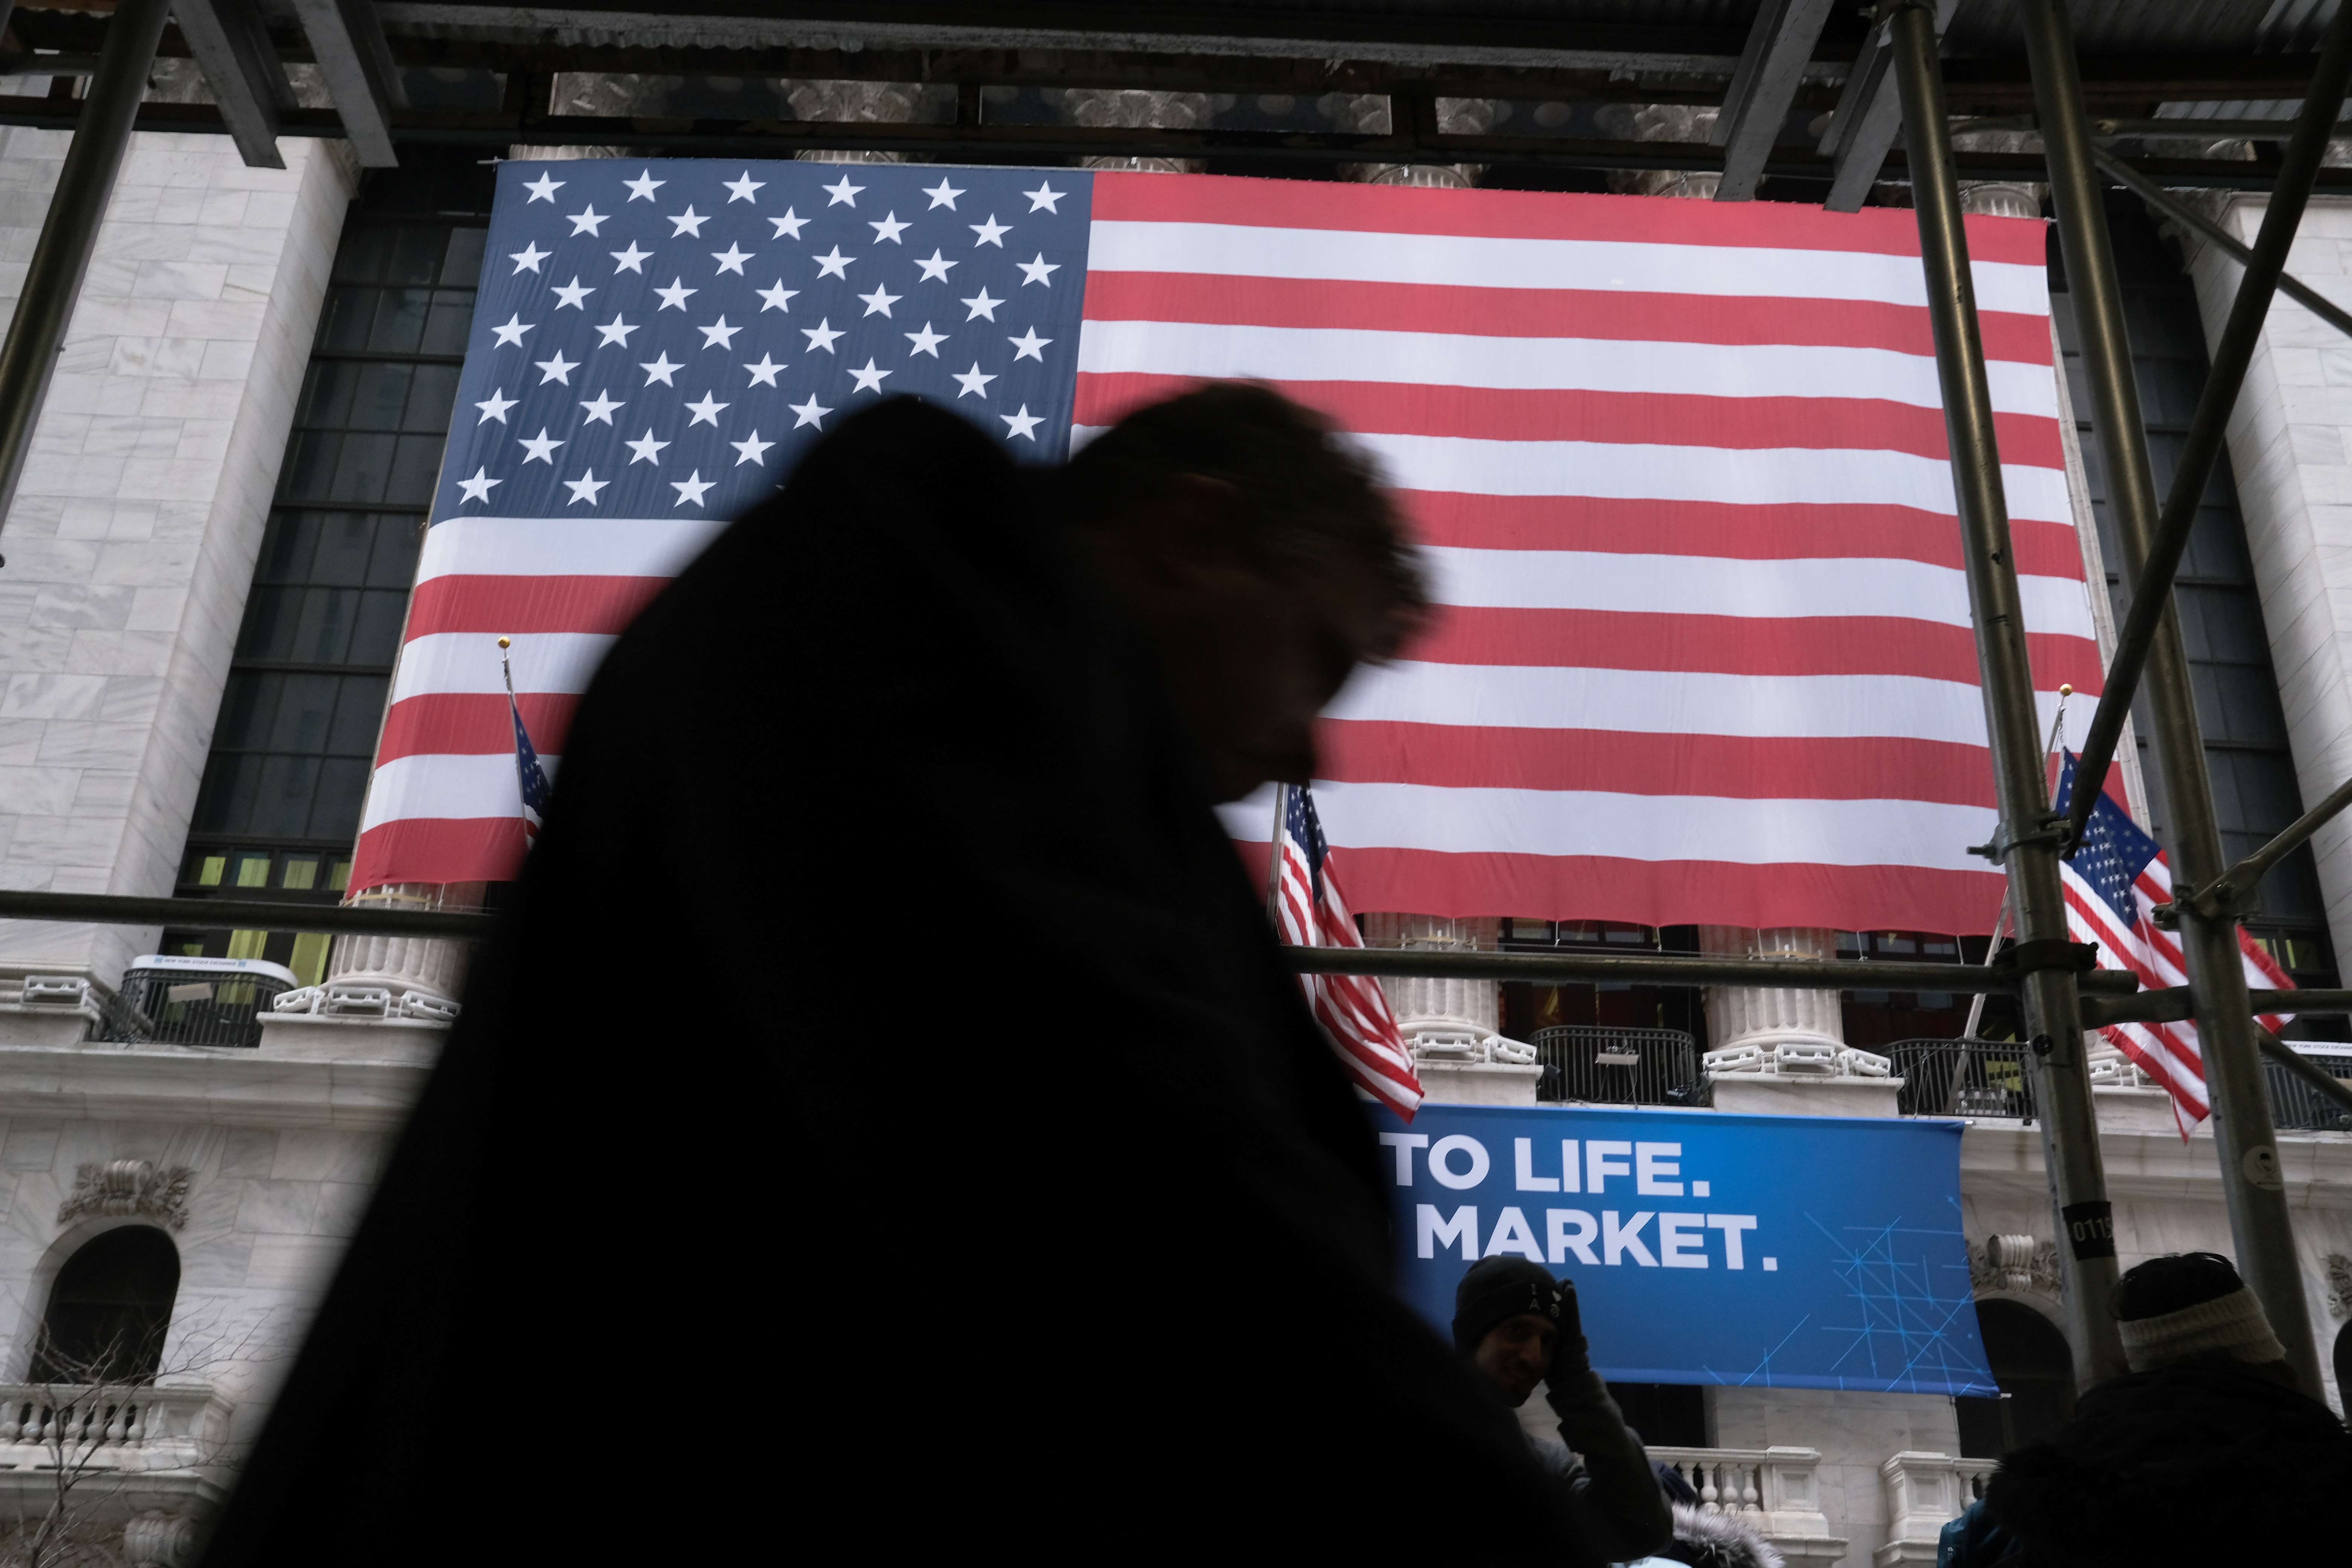 People walk past the New York Stock Exchange on February 12. US stocks have rallied to an all-time high this month despite worries over sluggish economies in China and Europe and the coronavirus outbreak. Photo: Getty Images / AFP